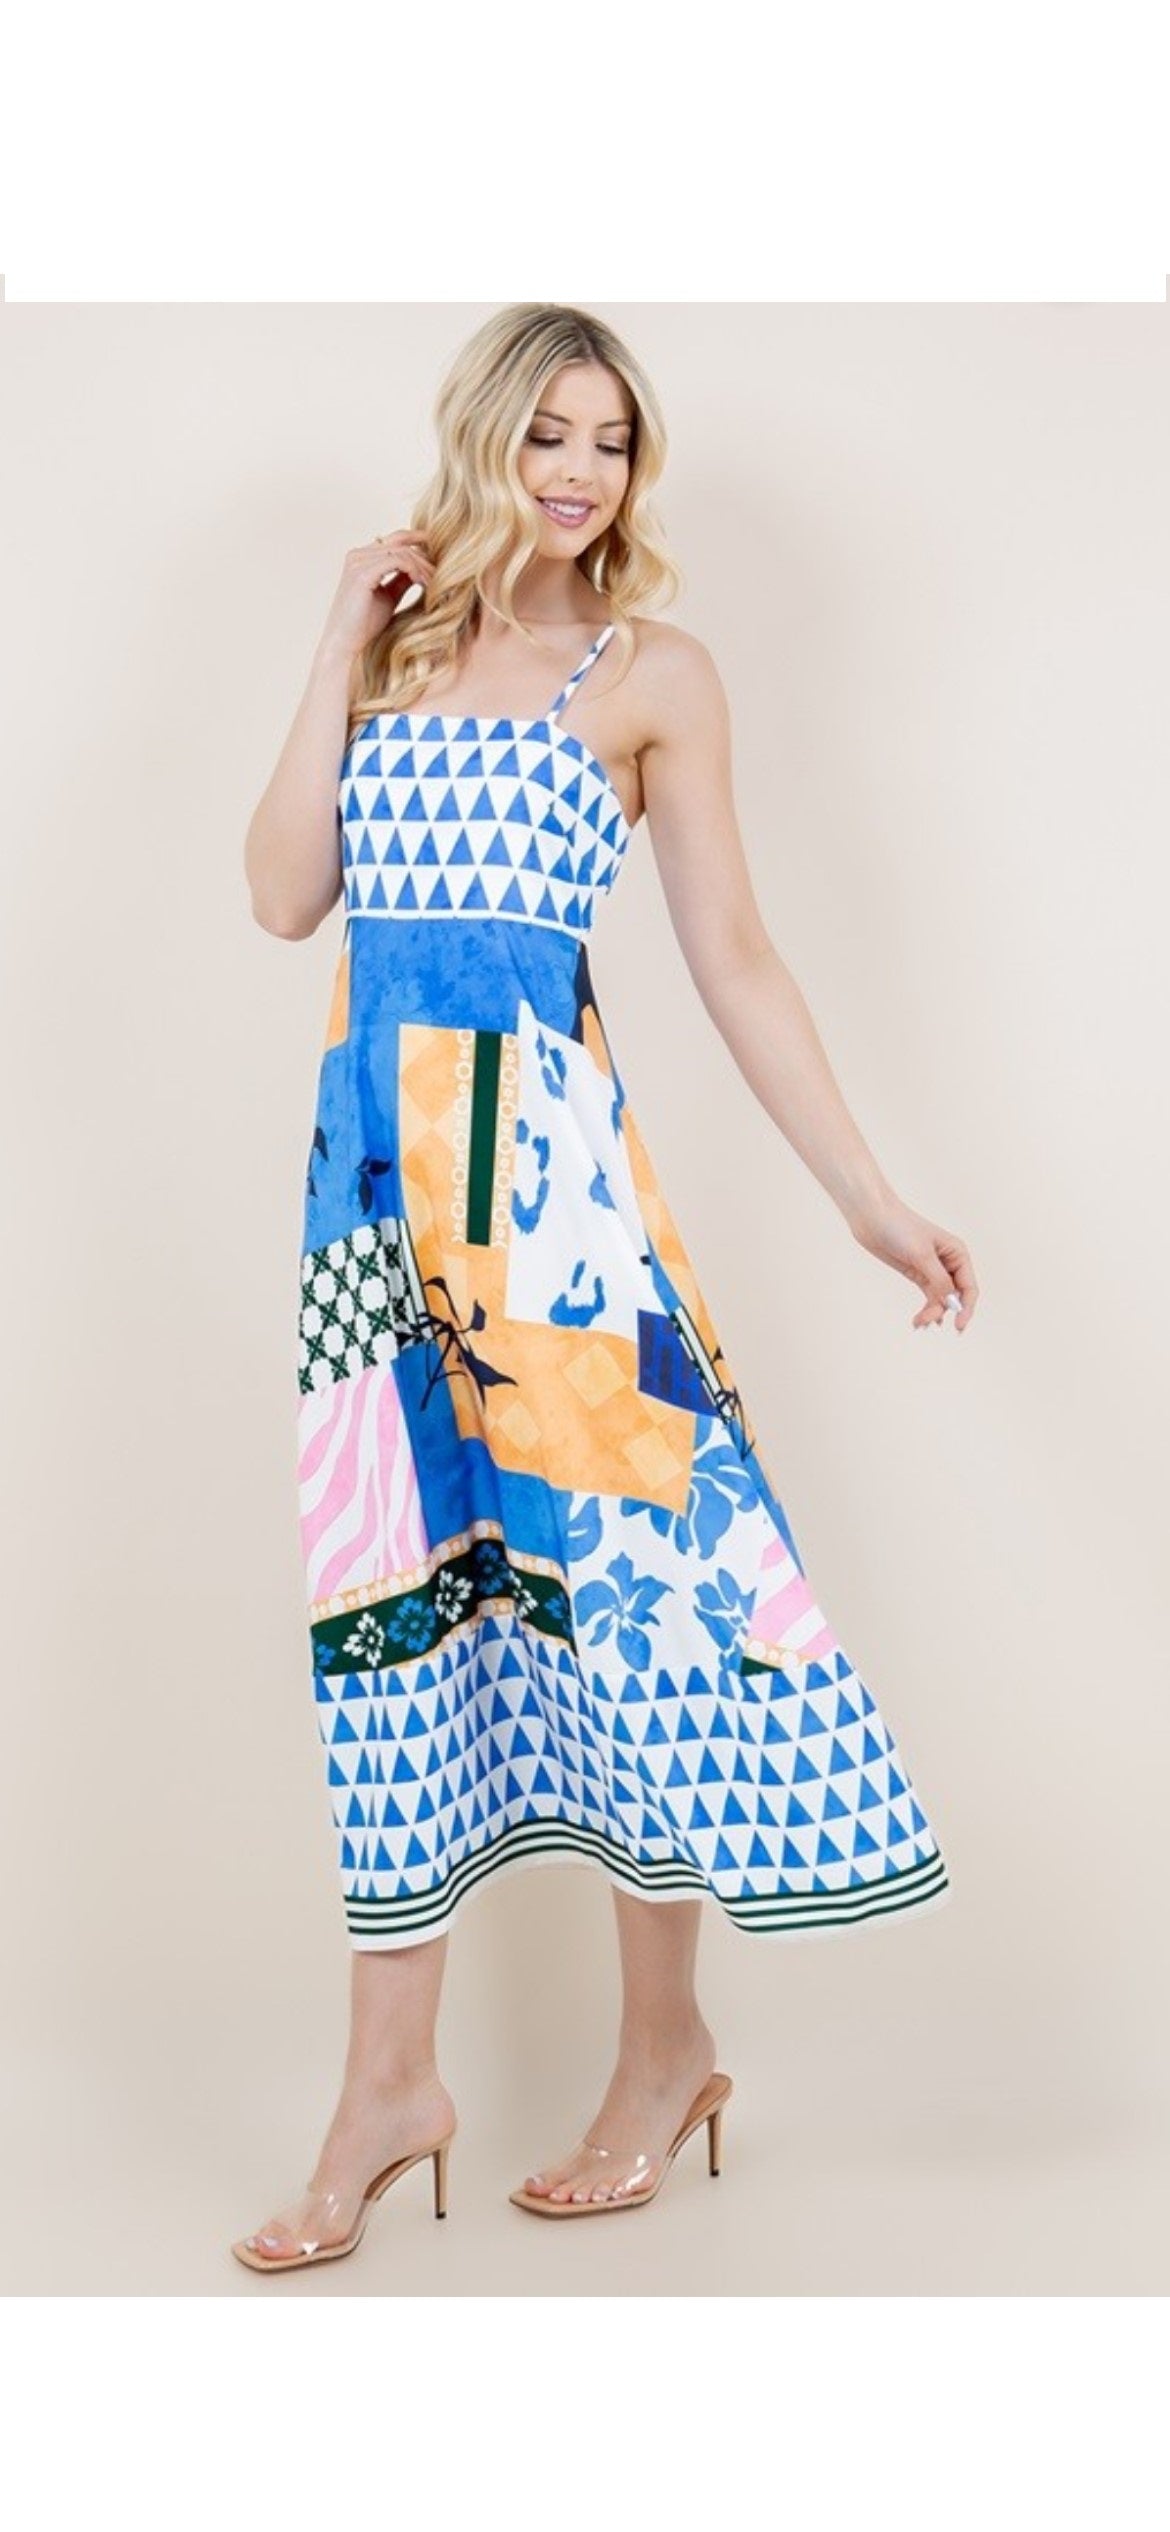 Amelia Blue Printed Dress With Back Zipper And Adjustable Straps - The Look By Lucy